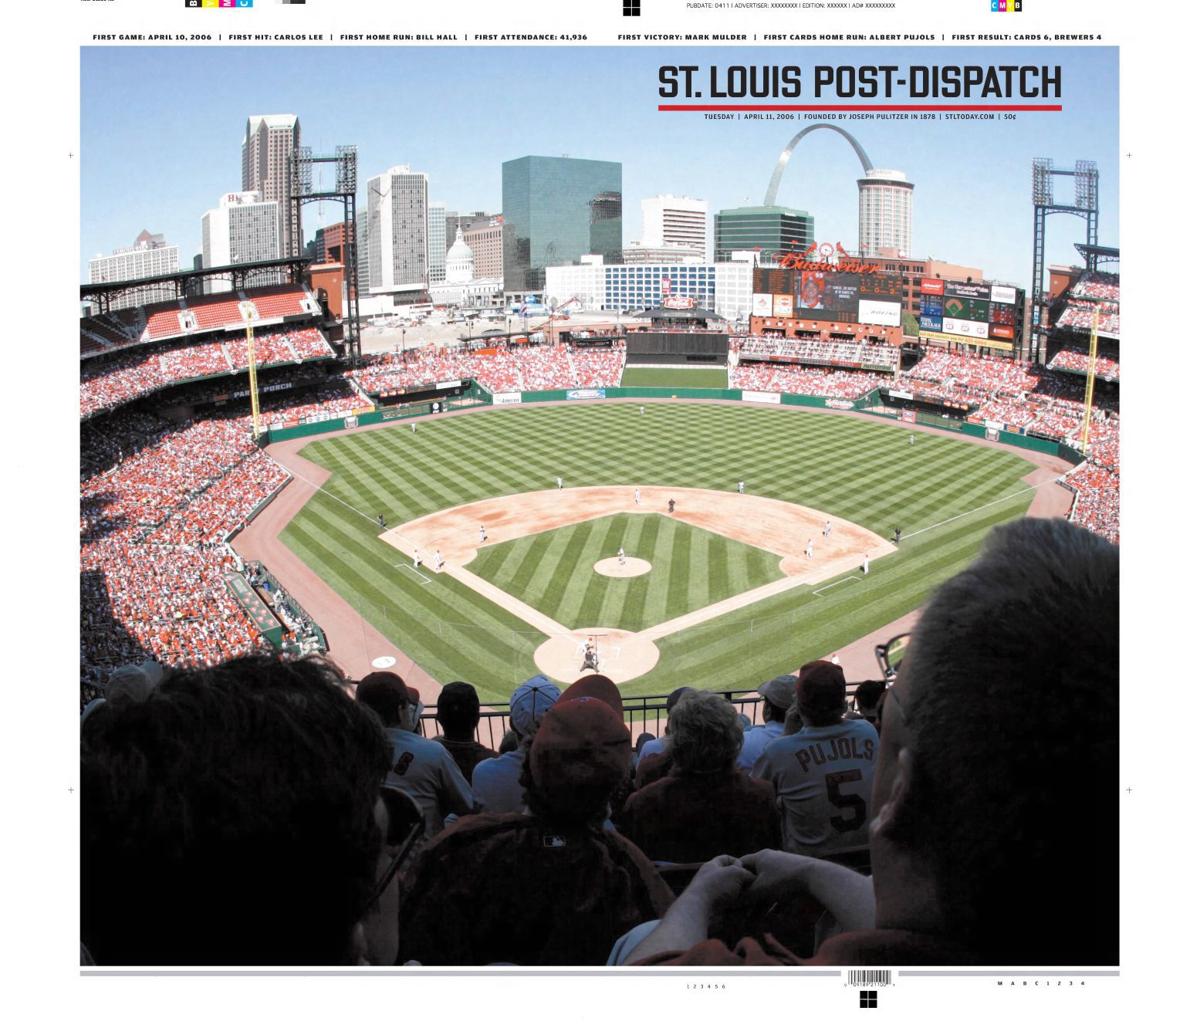 10 in '22: St. Louis sports stories that we'll be talking about next year